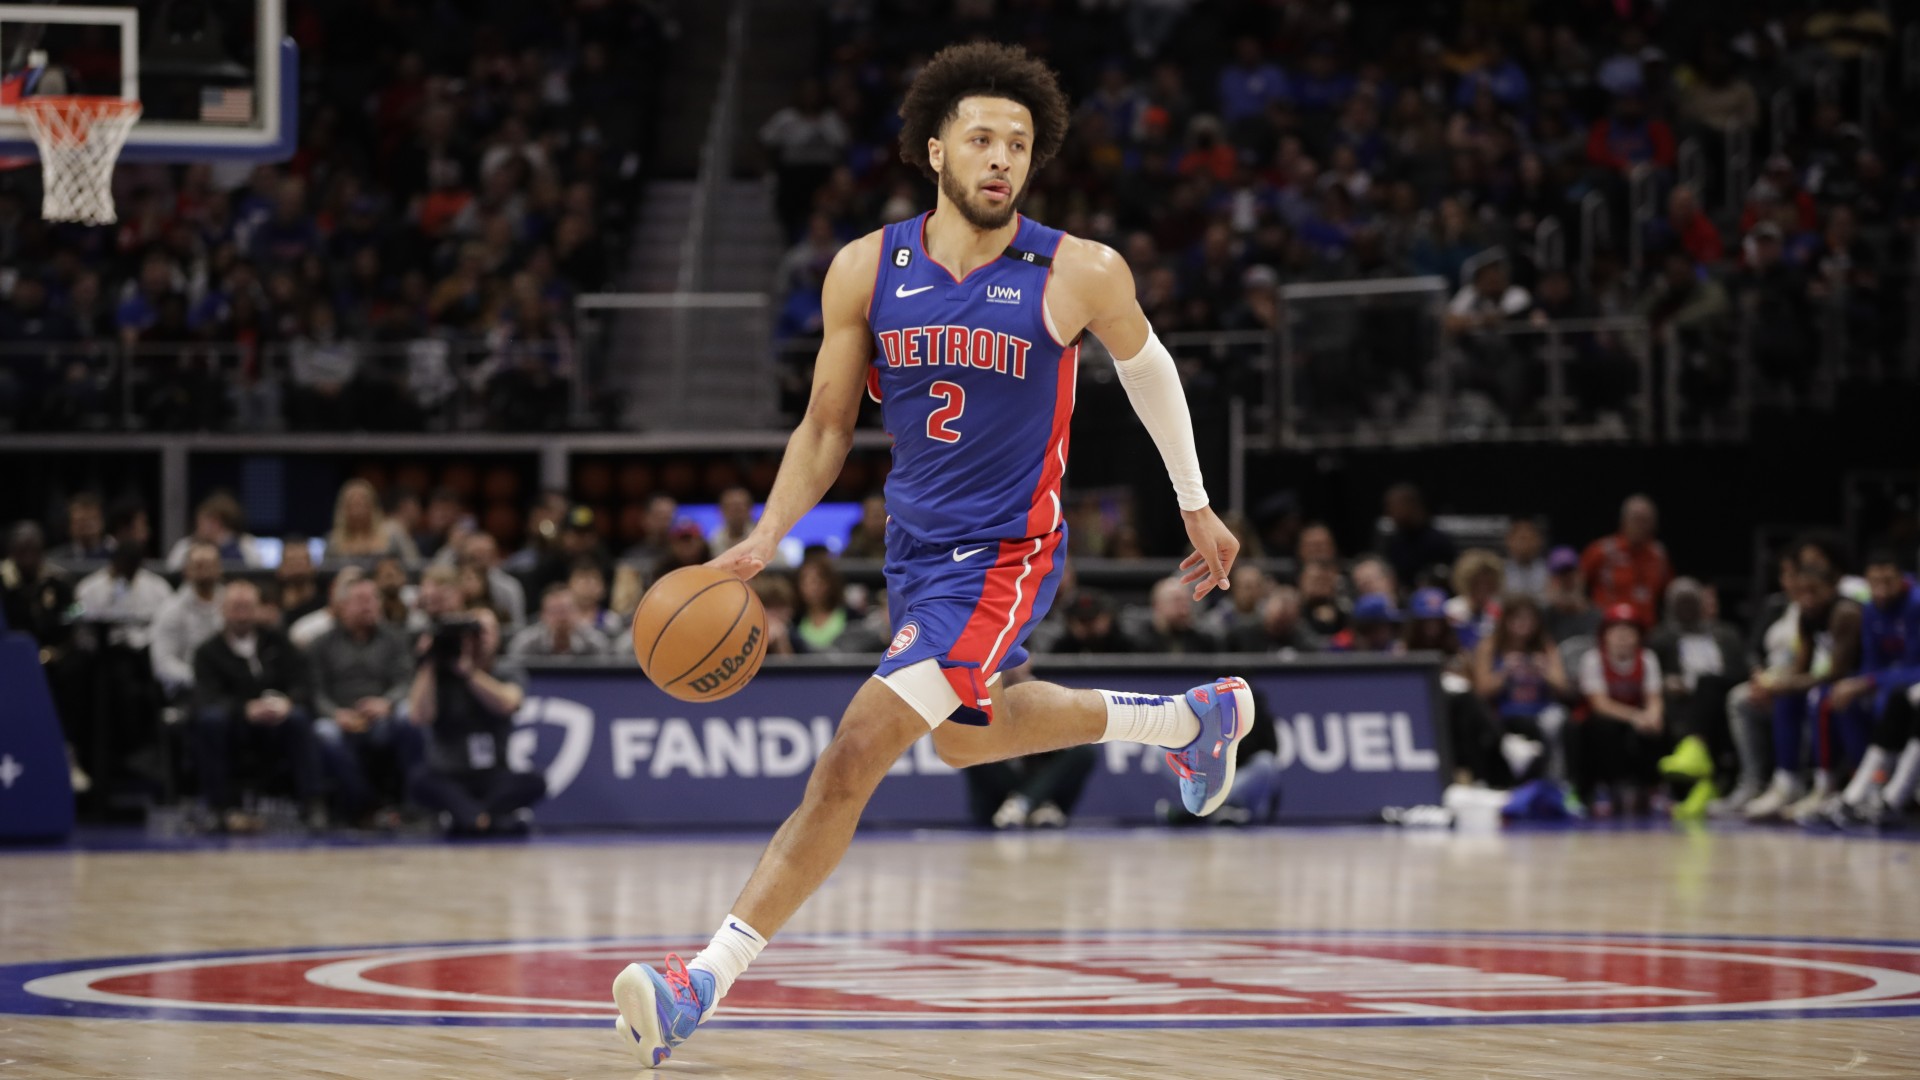 Cade Cunningham injury update: Detroit Pistons guard out at least